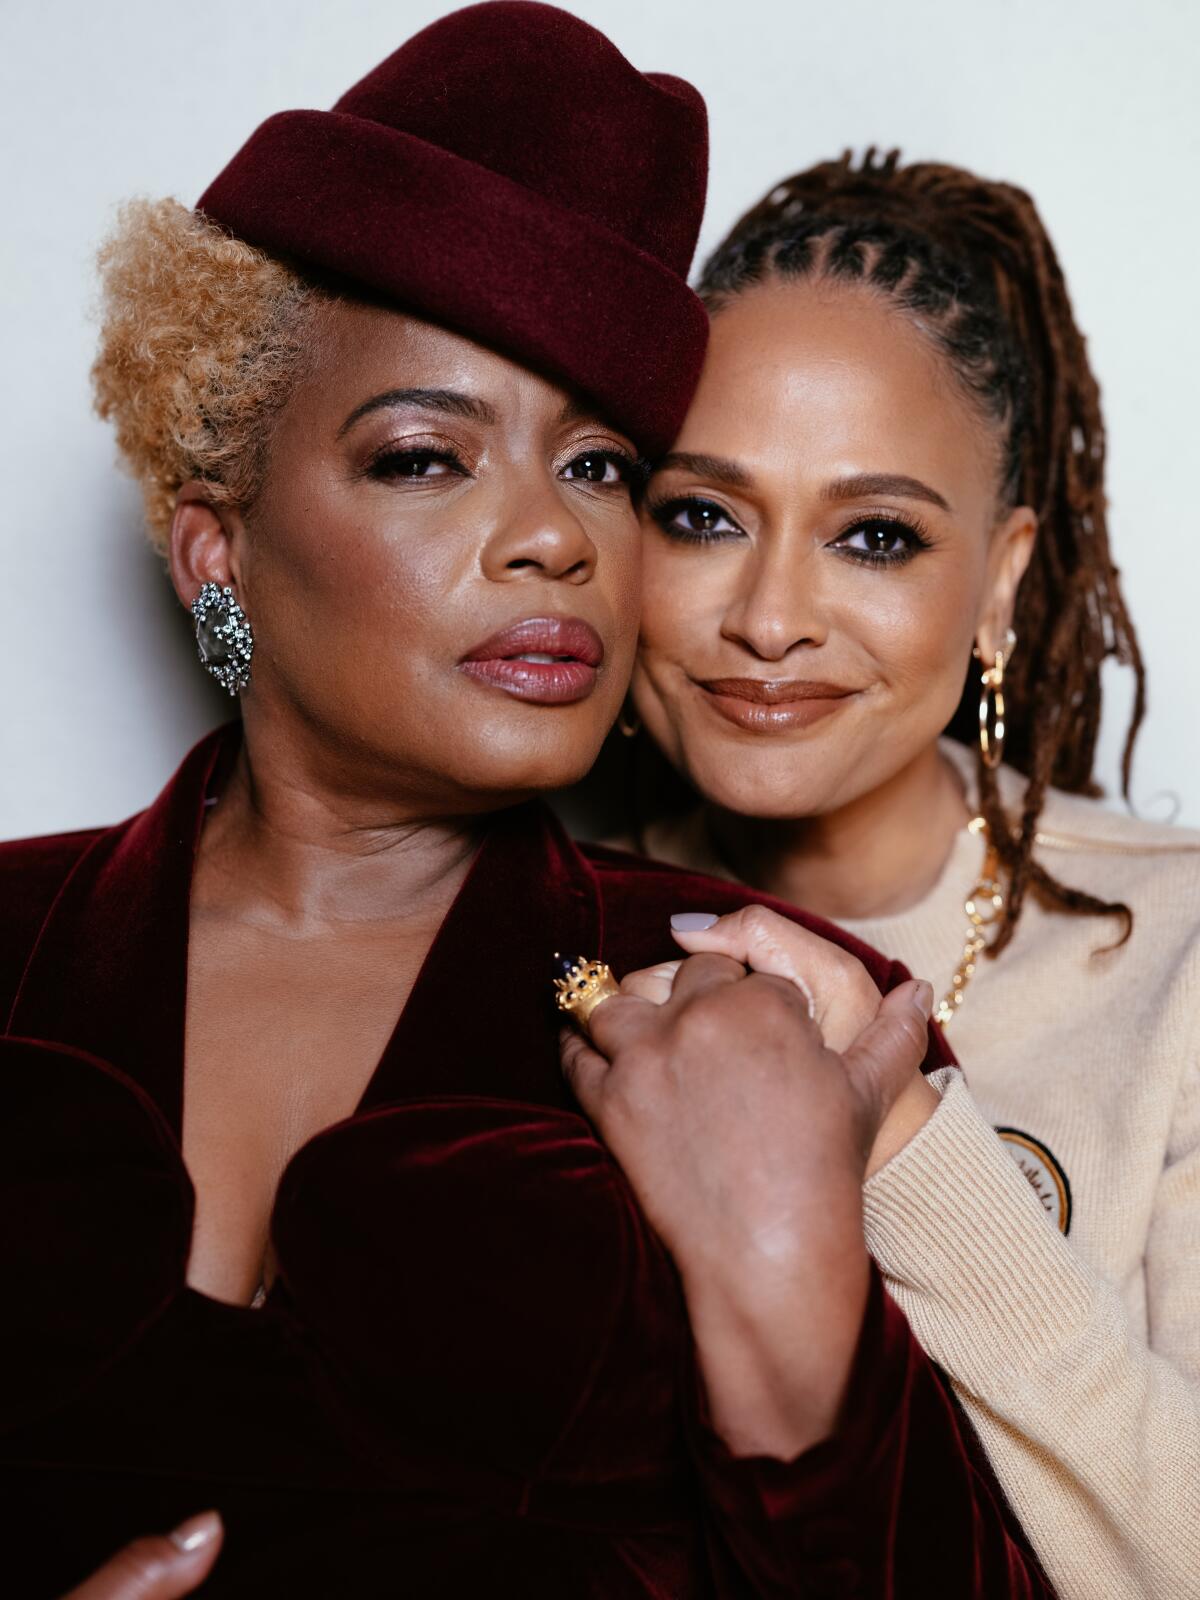 Aunjanue Ellis-Taylor and Ava DuVernay stand cheek to cheek, hands clasped together.